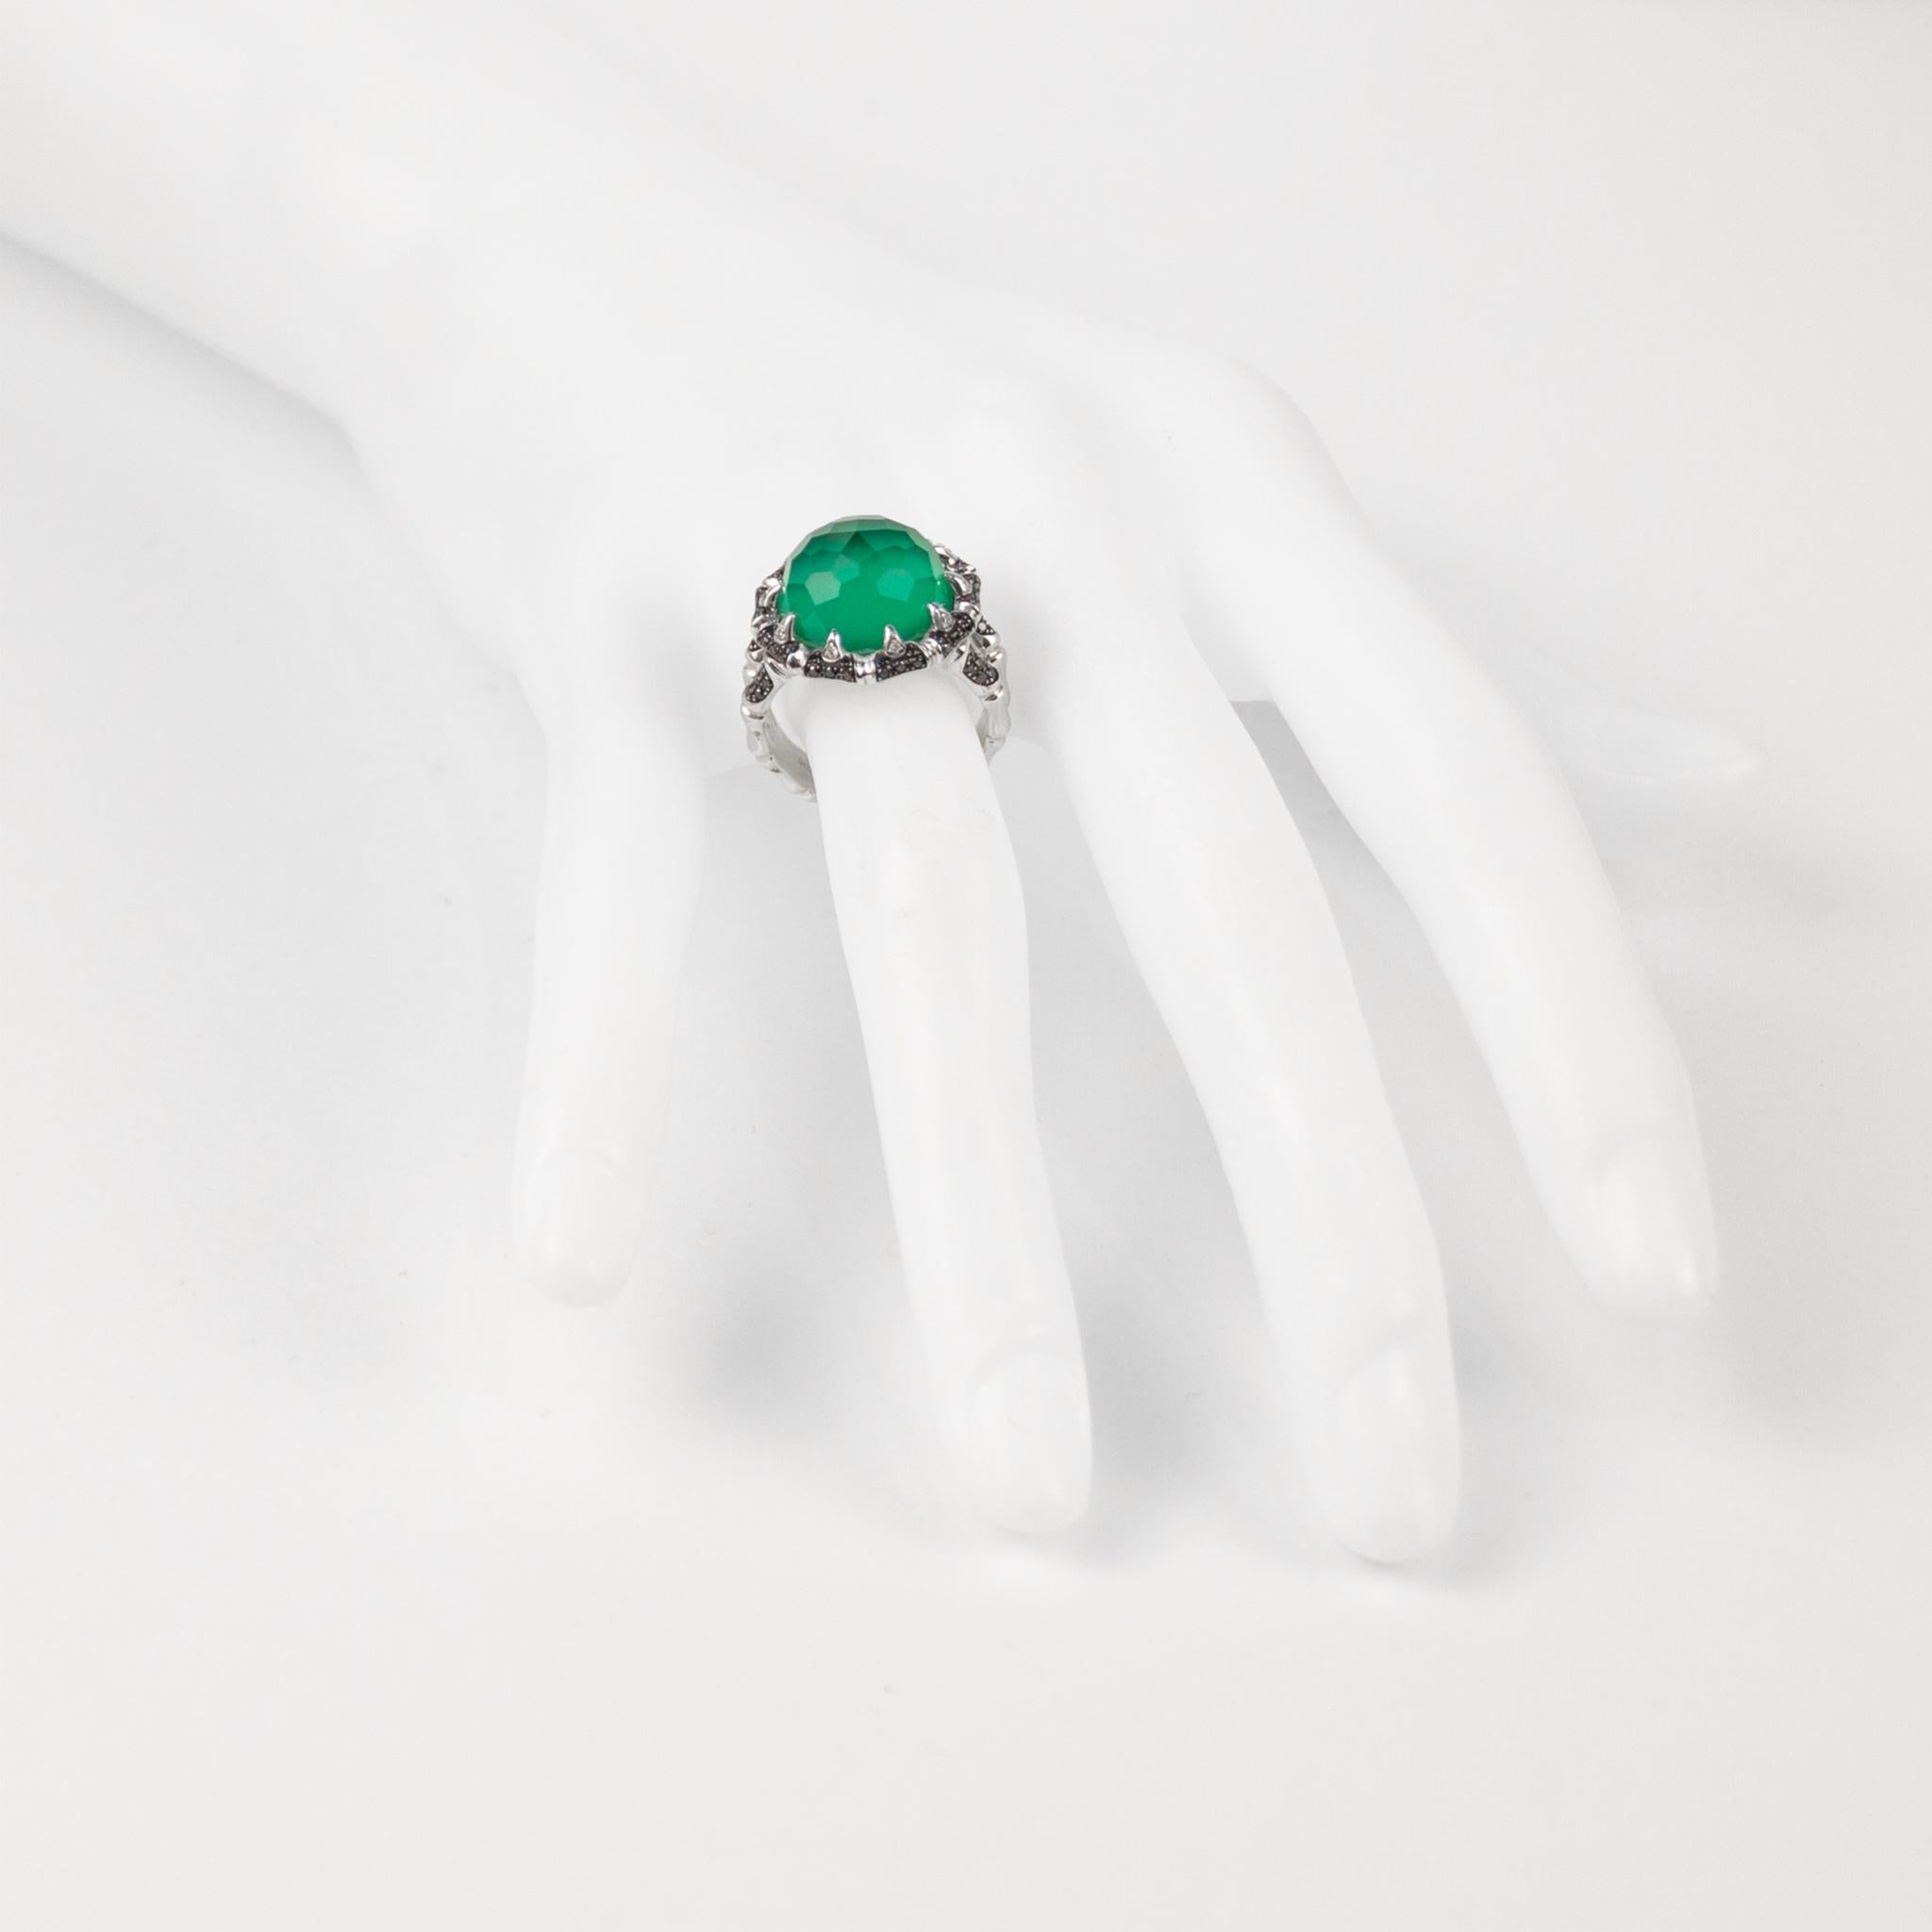 Stephen Webster 18k White Gold Diamond & Green Agate Ring In New Condition For Sale In North Miami Beach, FL